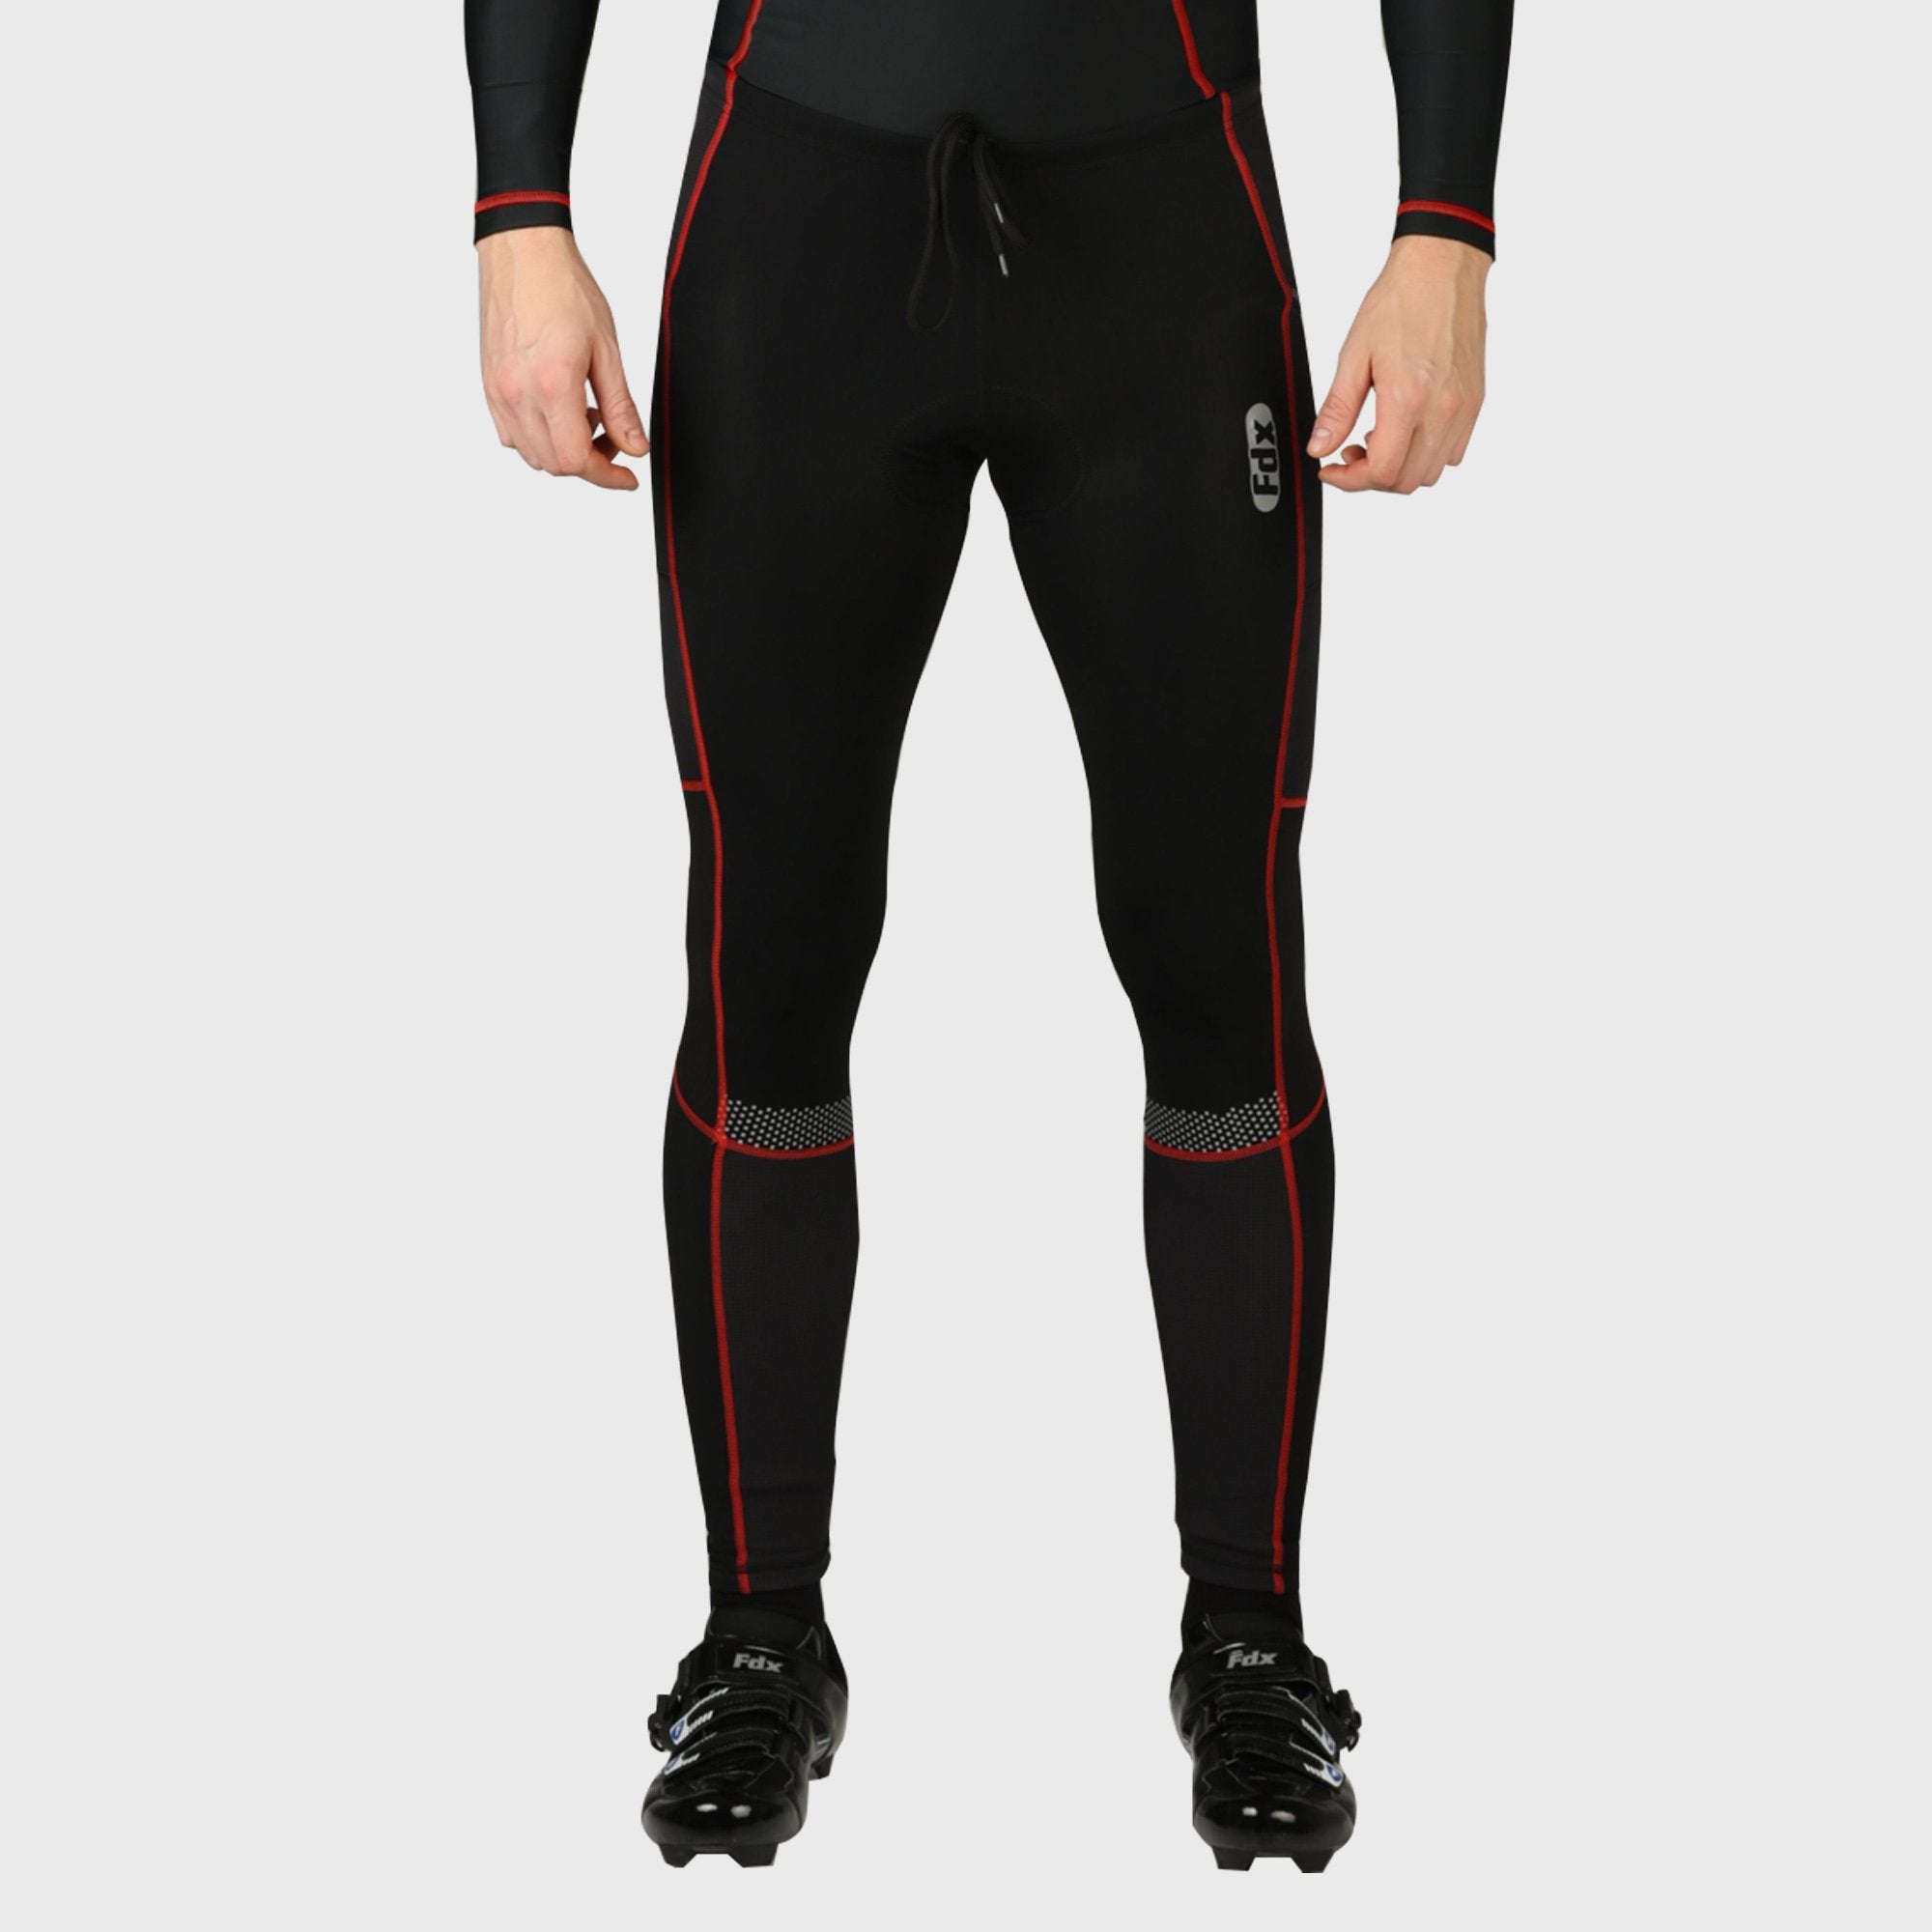 Fdx Heatchaser Men's Compression Winter Cycling Tights Black, Red & Blue